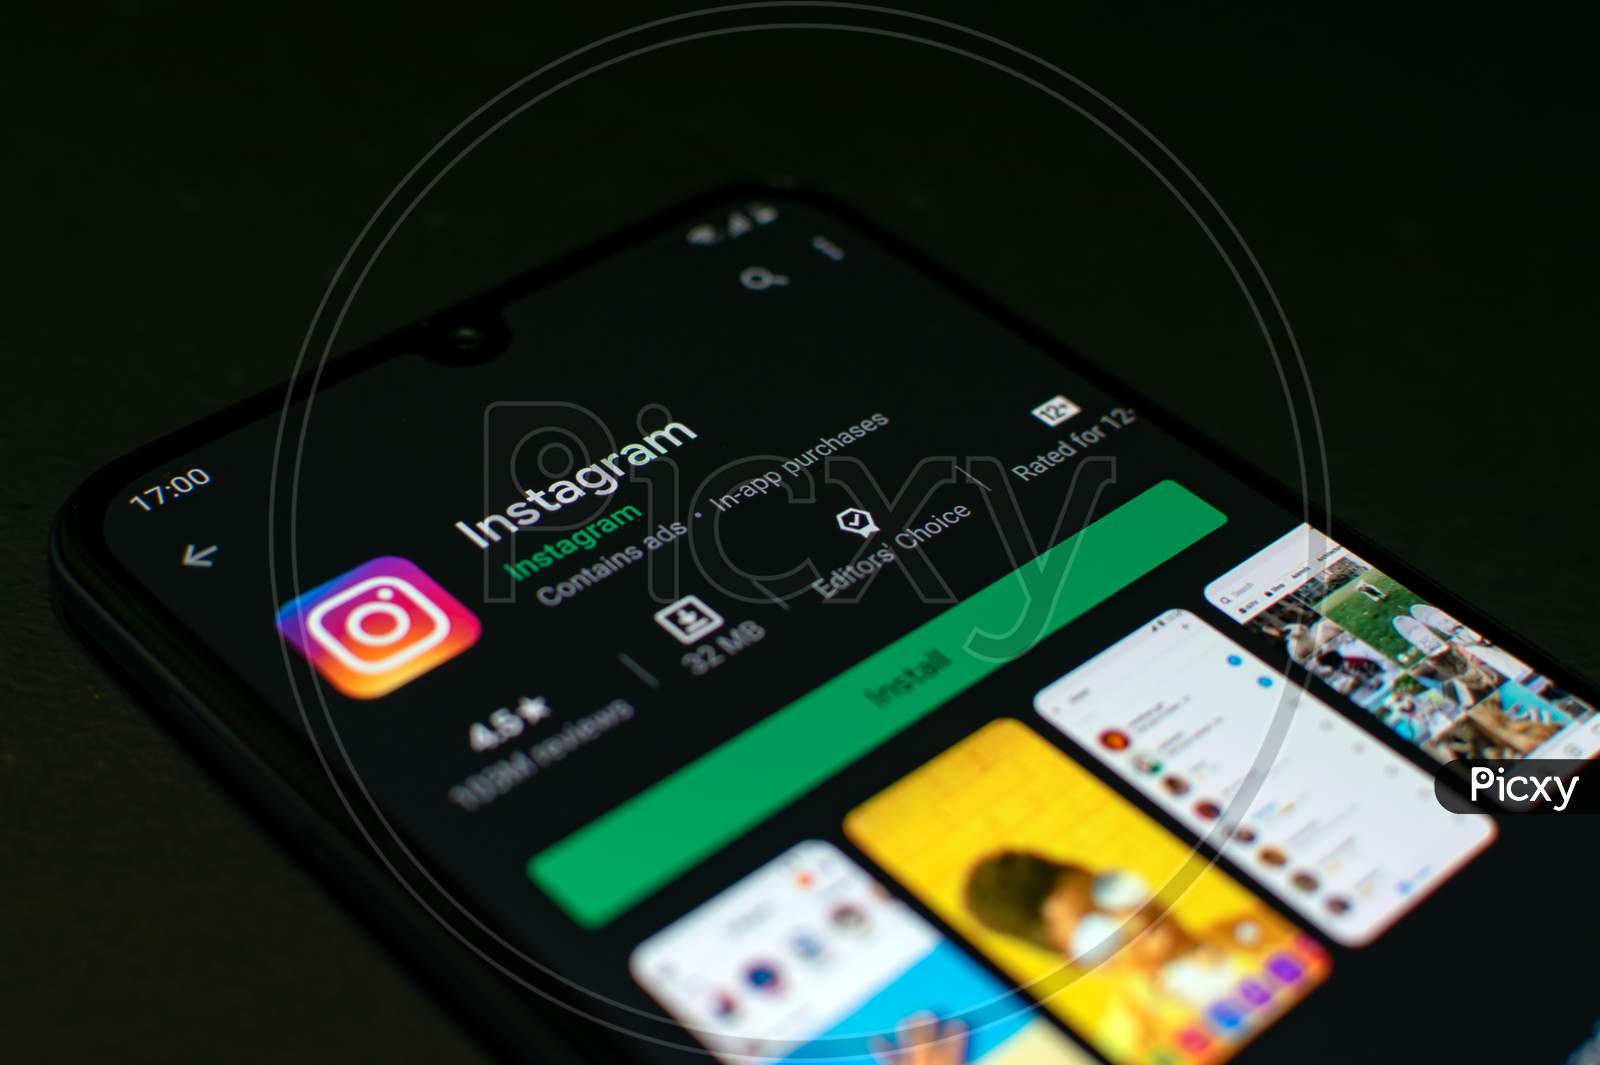 Instagram application on Smartphone screen. This Social Network app is a freeware in Android Playstore developed by Instagram